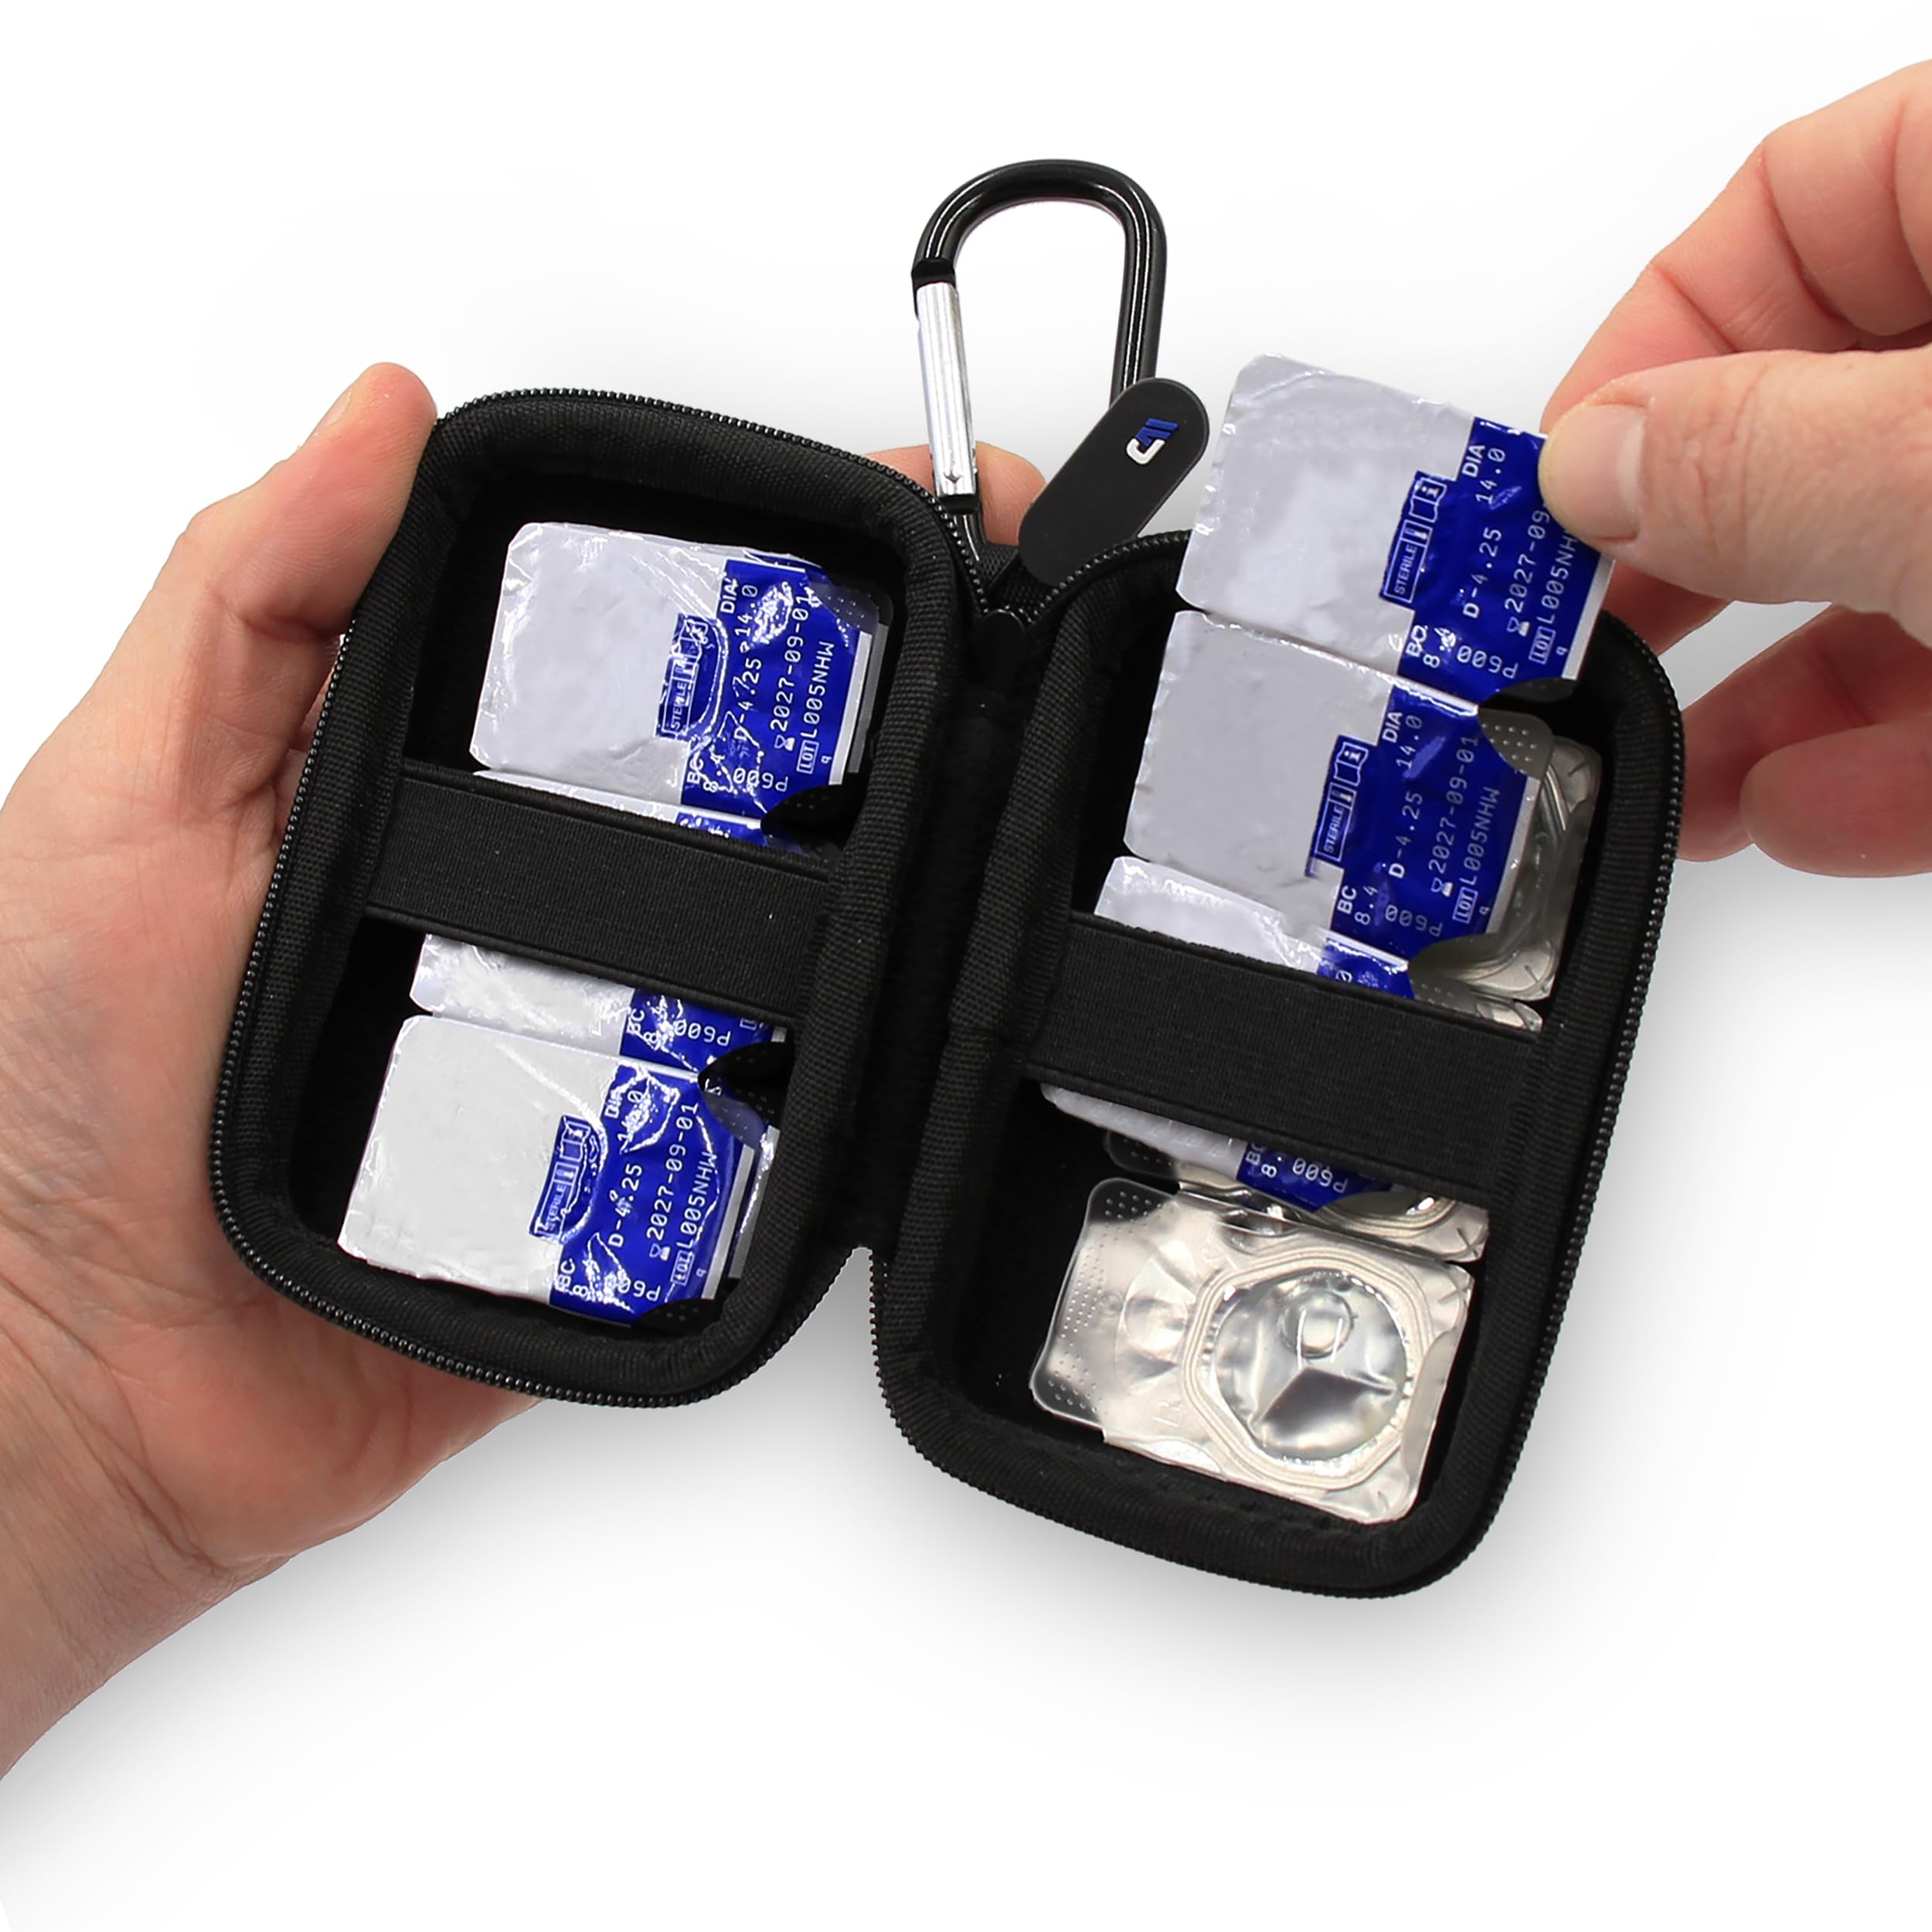 CASEMATIX Travel Case for Contact Lenses Fits 12 Daily Disposable Contacts in a Compact Dual-sided Storage Case with Clip On Carabiner - Includes Contact Lens Case Only